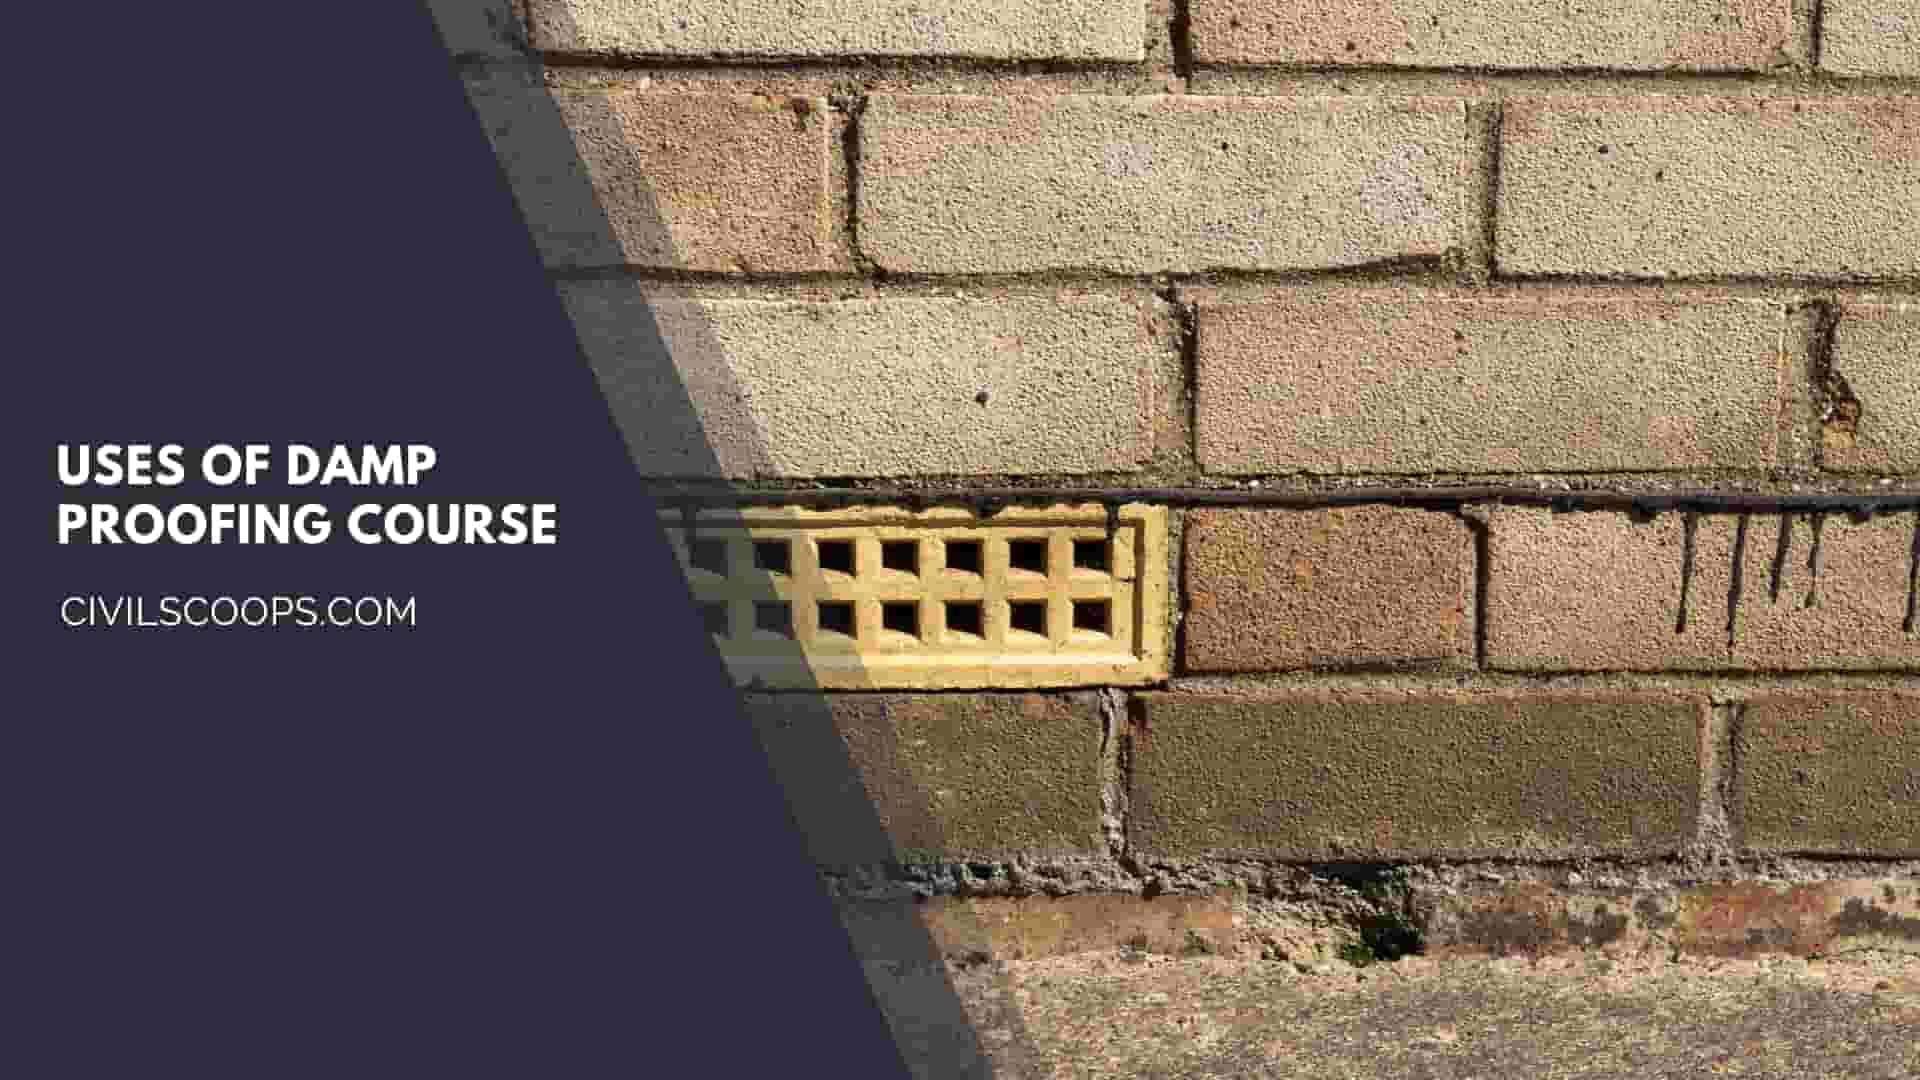 Uses of Damp Proofing Course